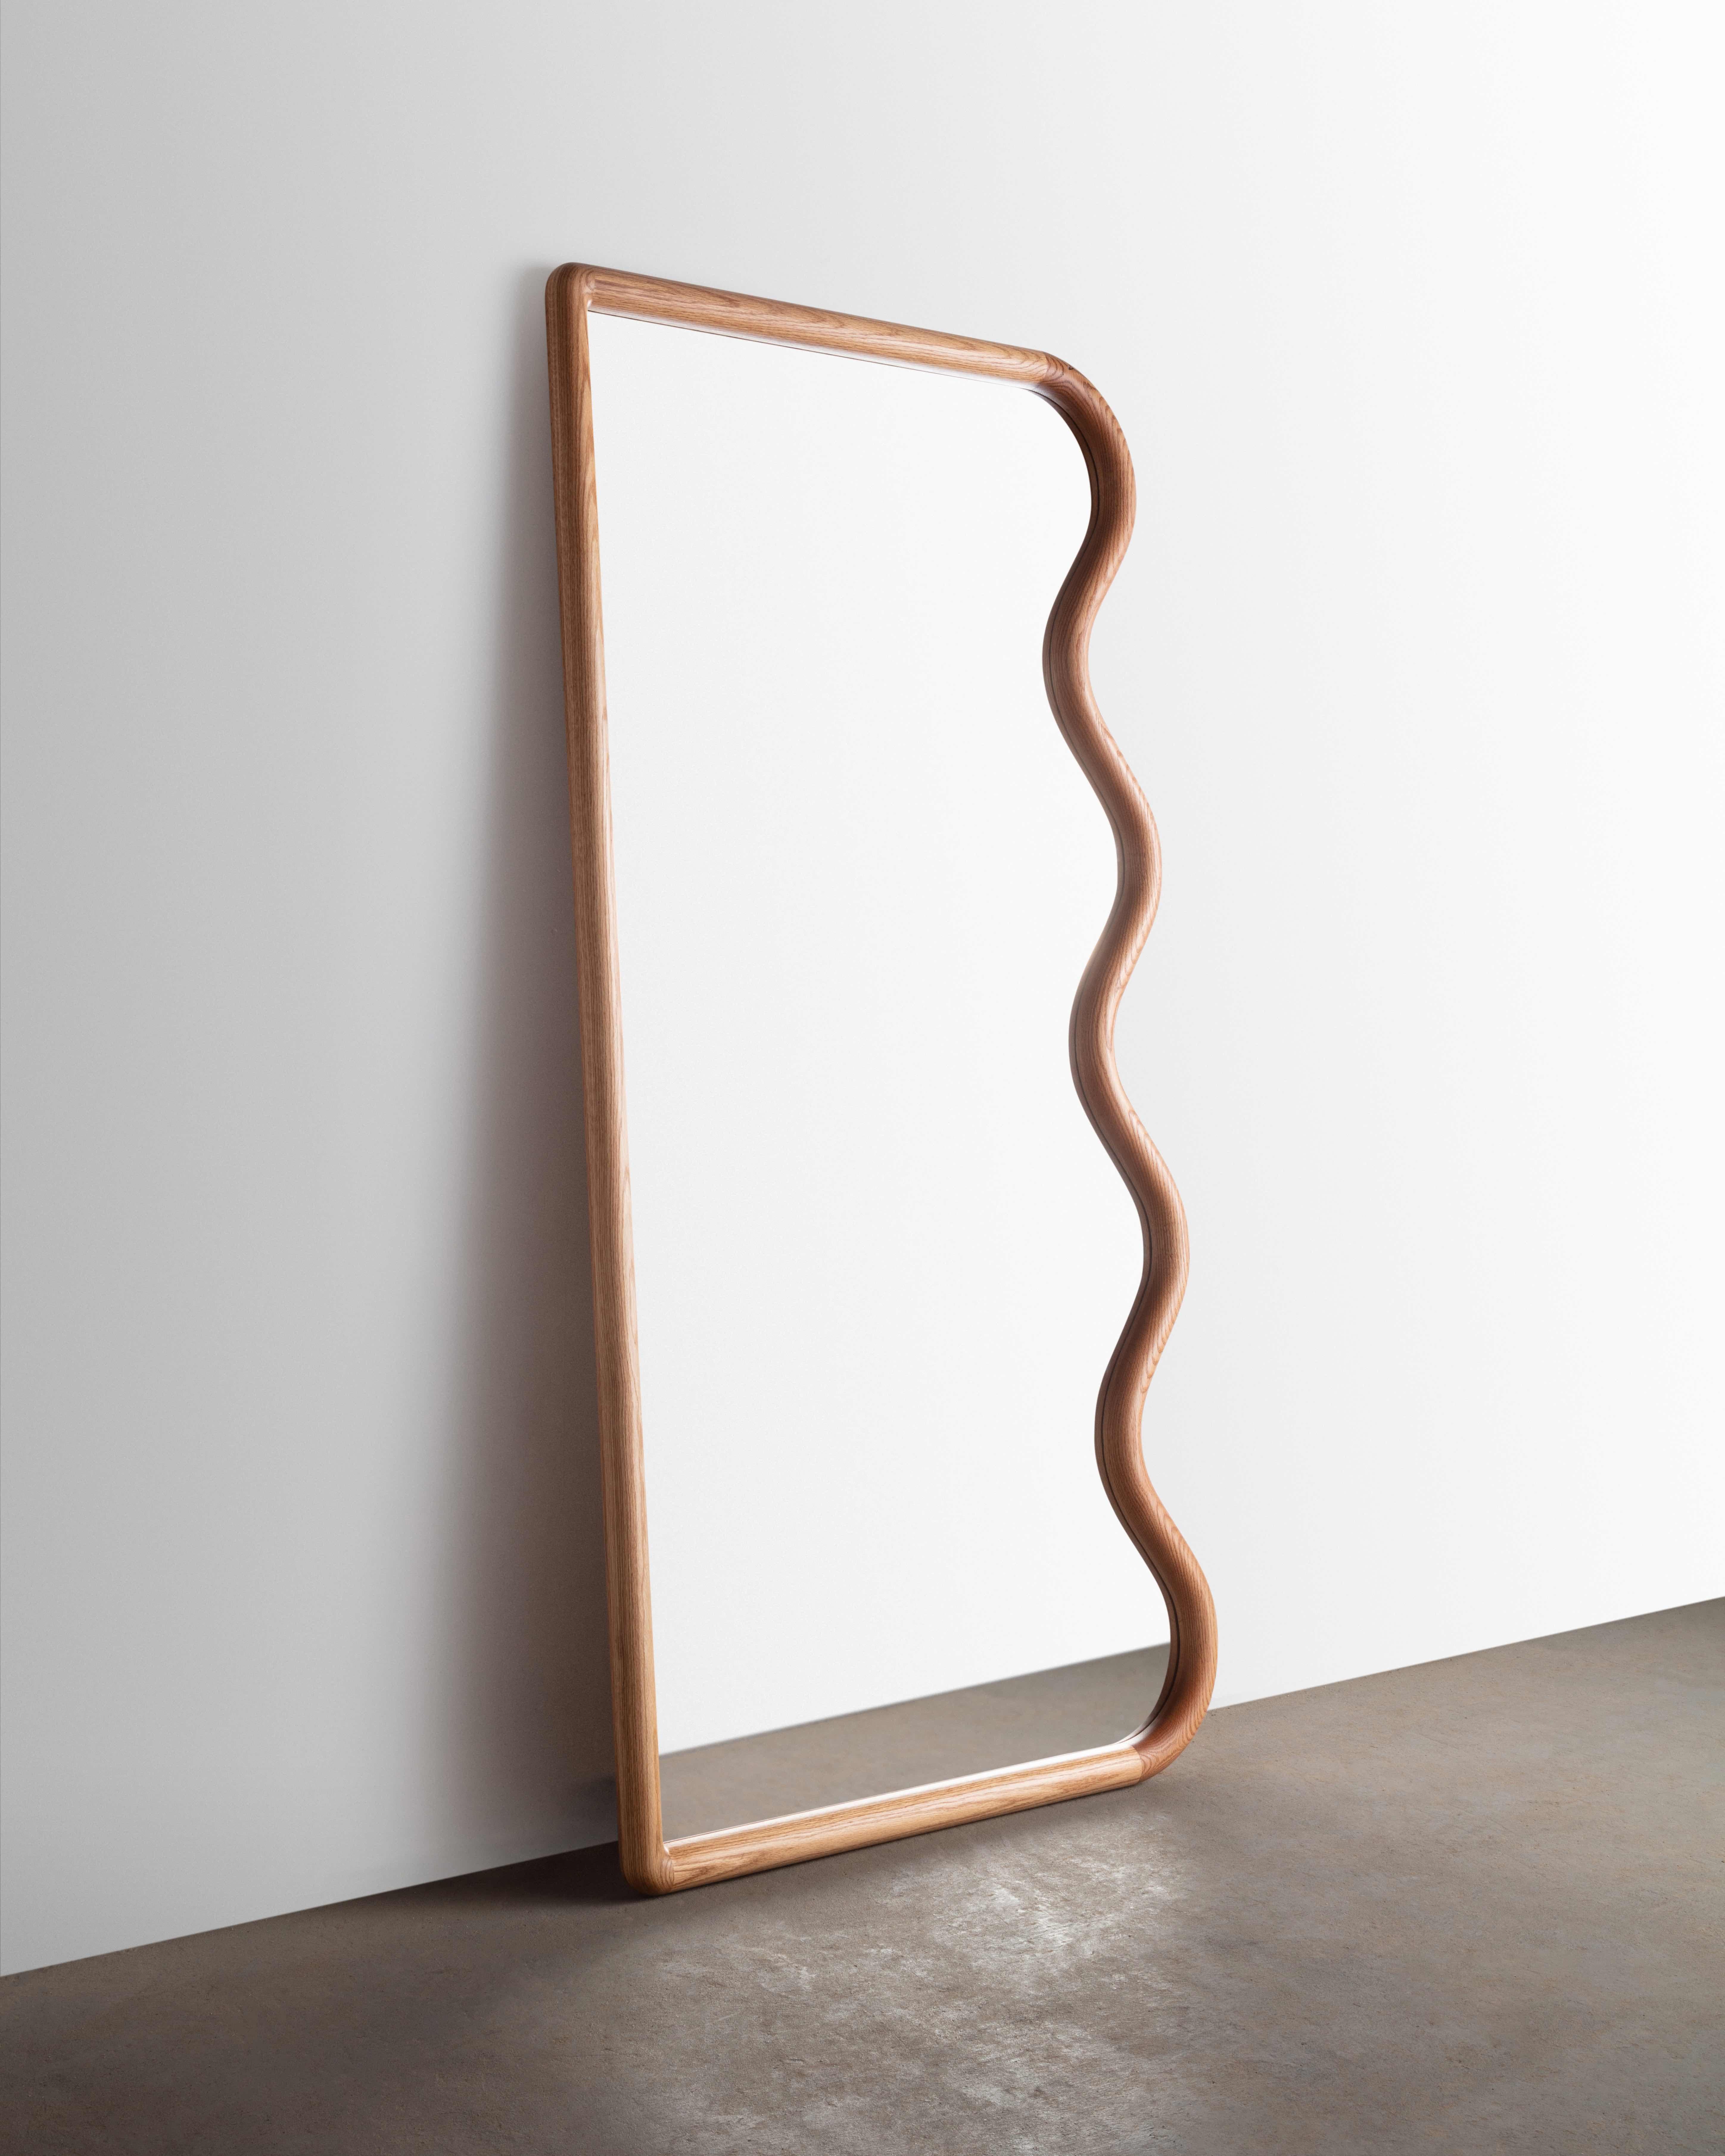 Constructed from Solid Red Oak this full-length squiggle mirror is sure to brighten up and space- All parts are hand sculpted from solid slab lumber.

Mirror can be placed leaning or we can supply custom hardware to hang vertically or horizontally